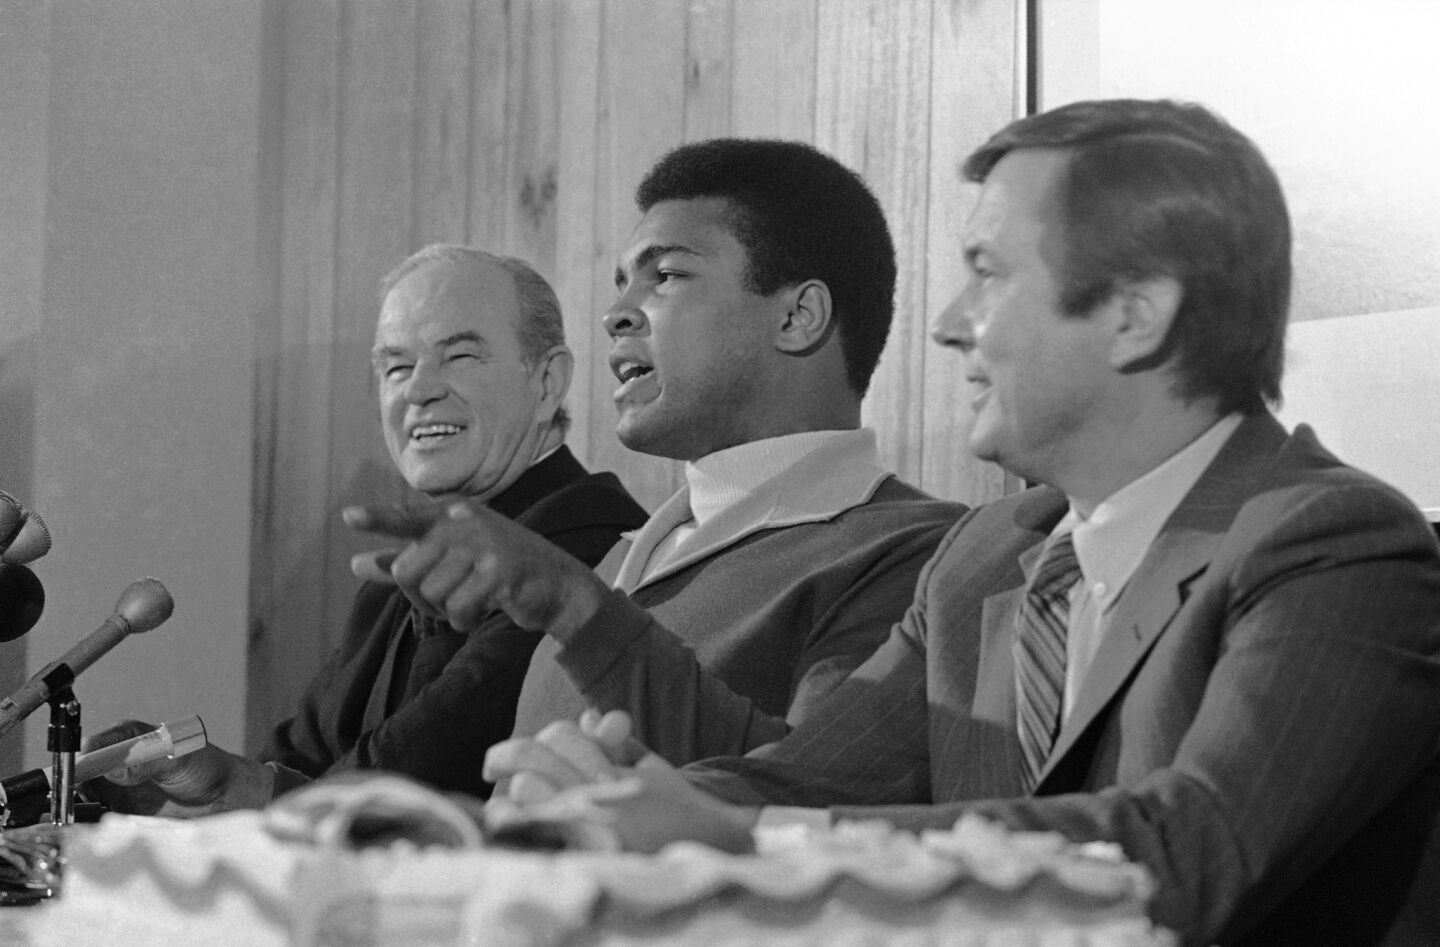 Muhammad Ali is flanked by Jack Kent Cooke, left, and Jerry Perenchio, financial backers of his title fight with Joe Frazier, at a news conference in L.A. in 1971.